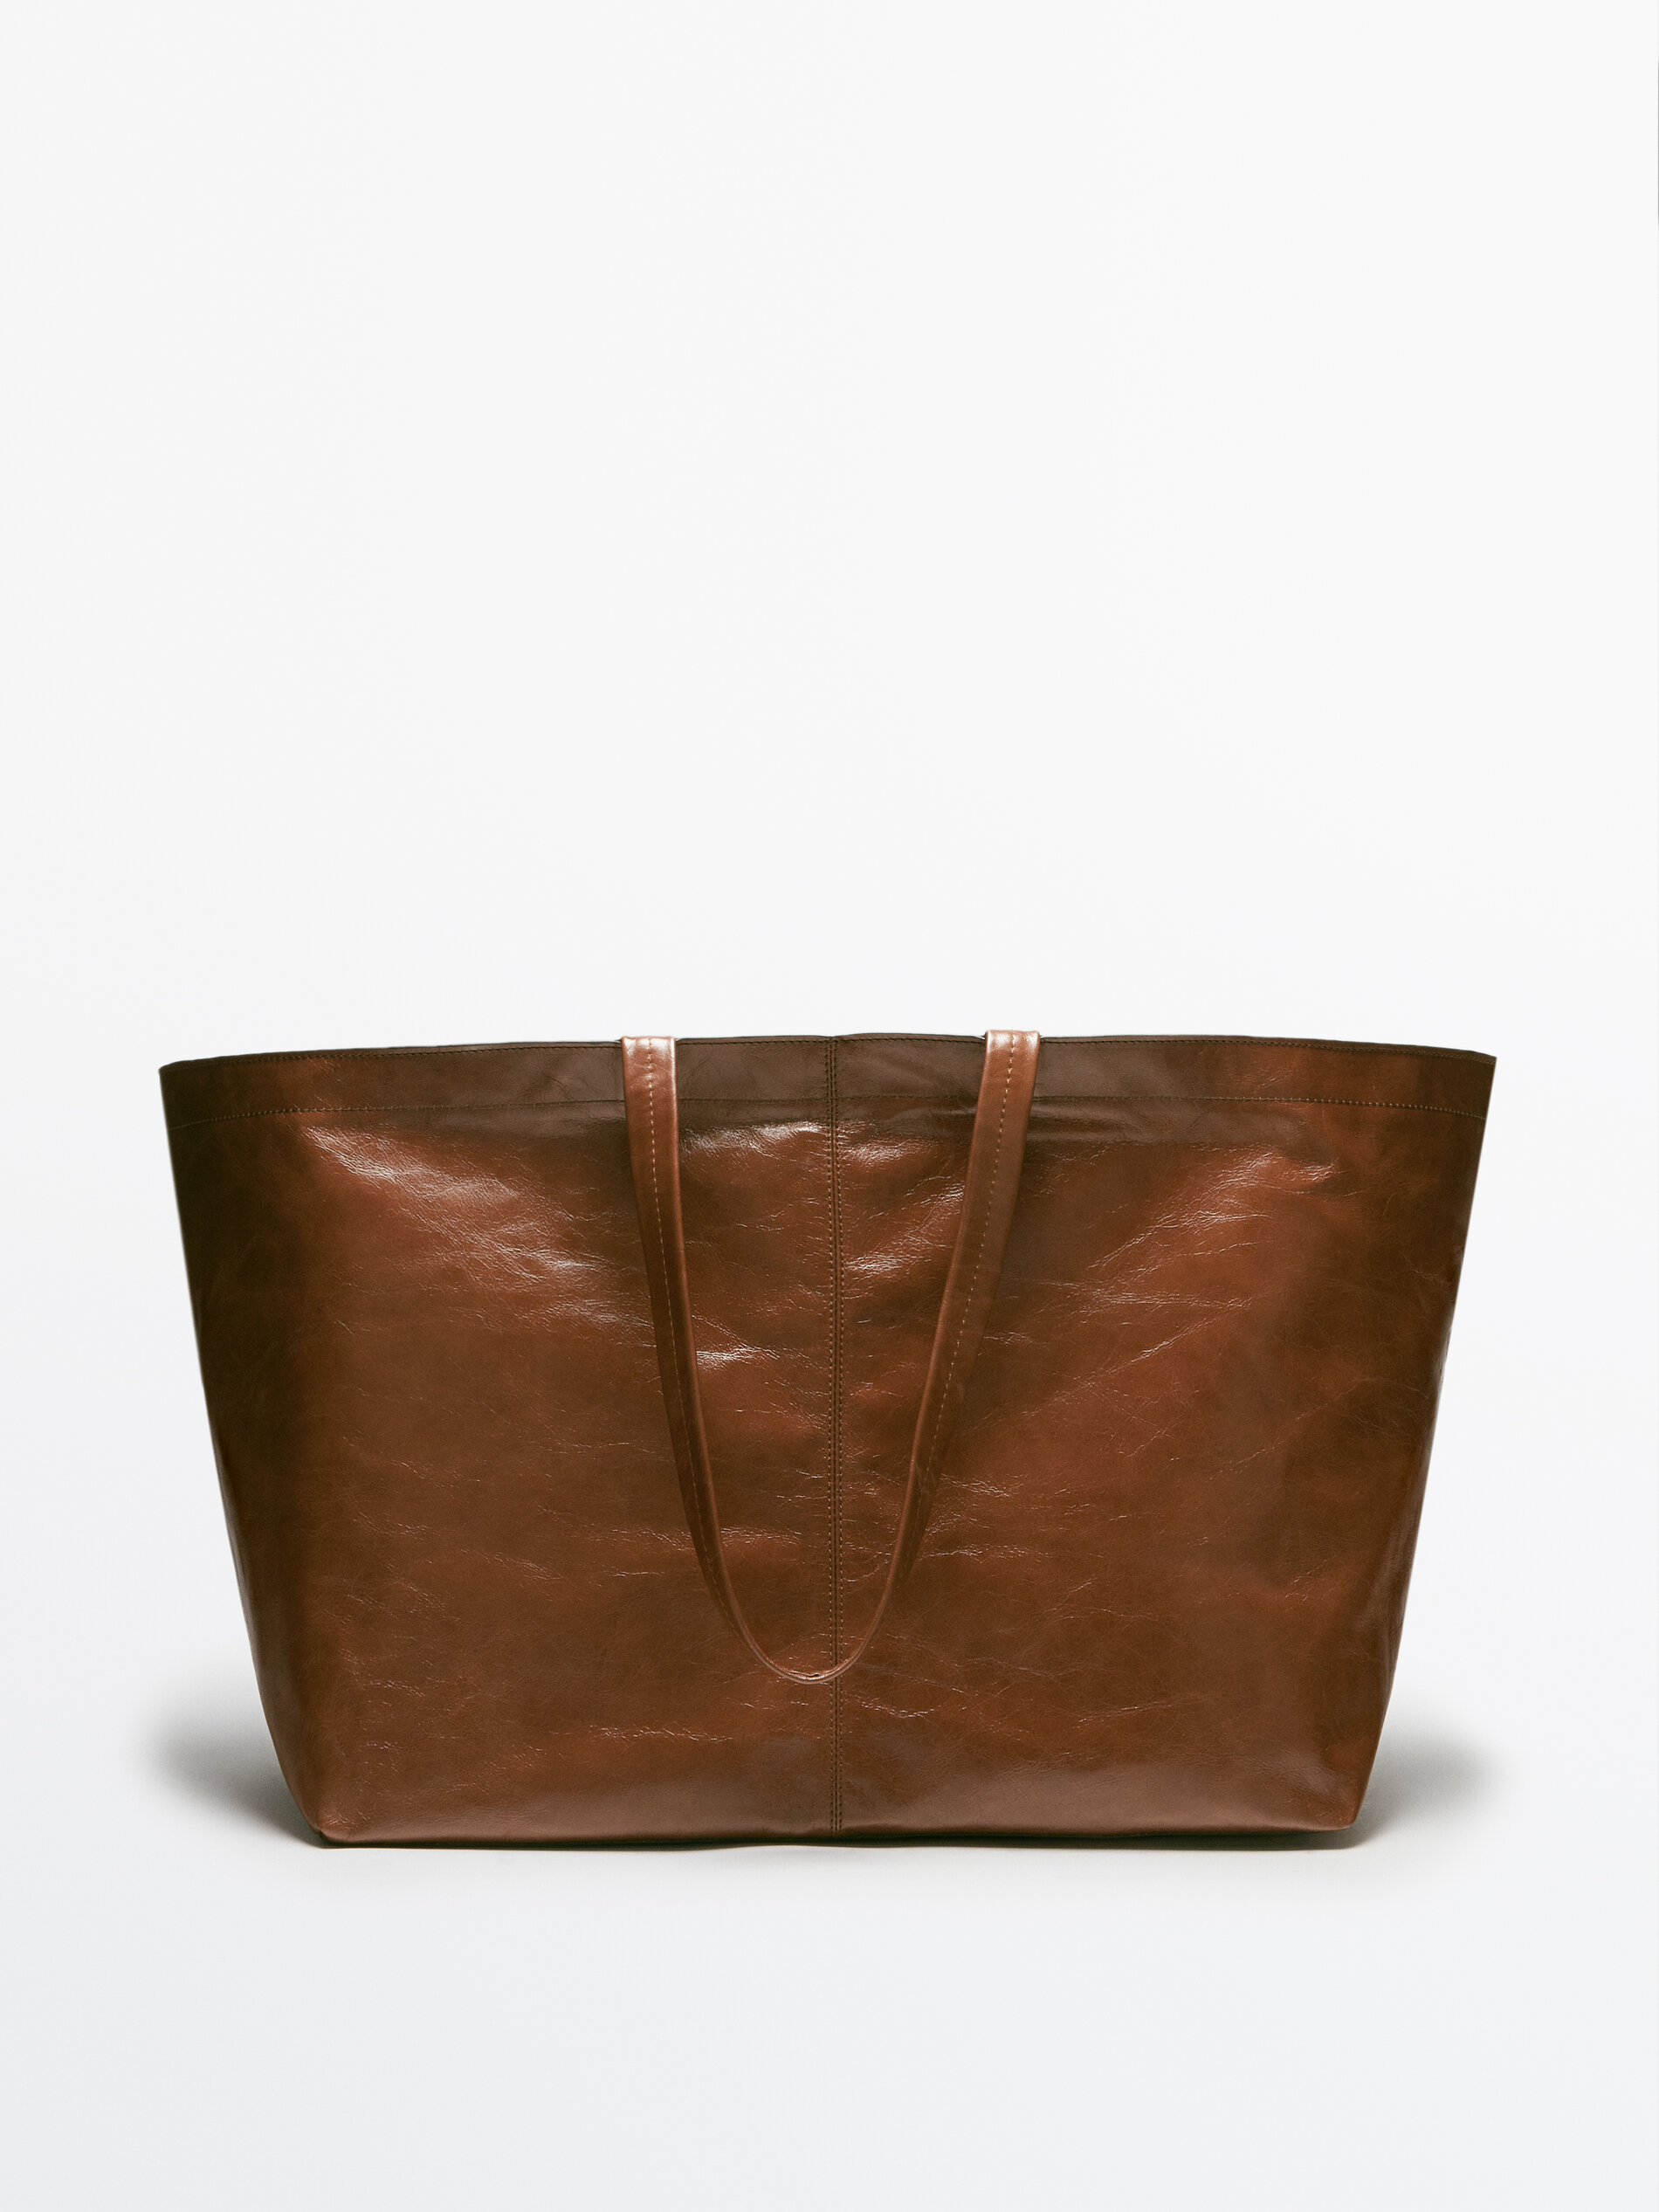 Massimo Dutti + Maxi Crackled Leather-based mostly Tote Glean